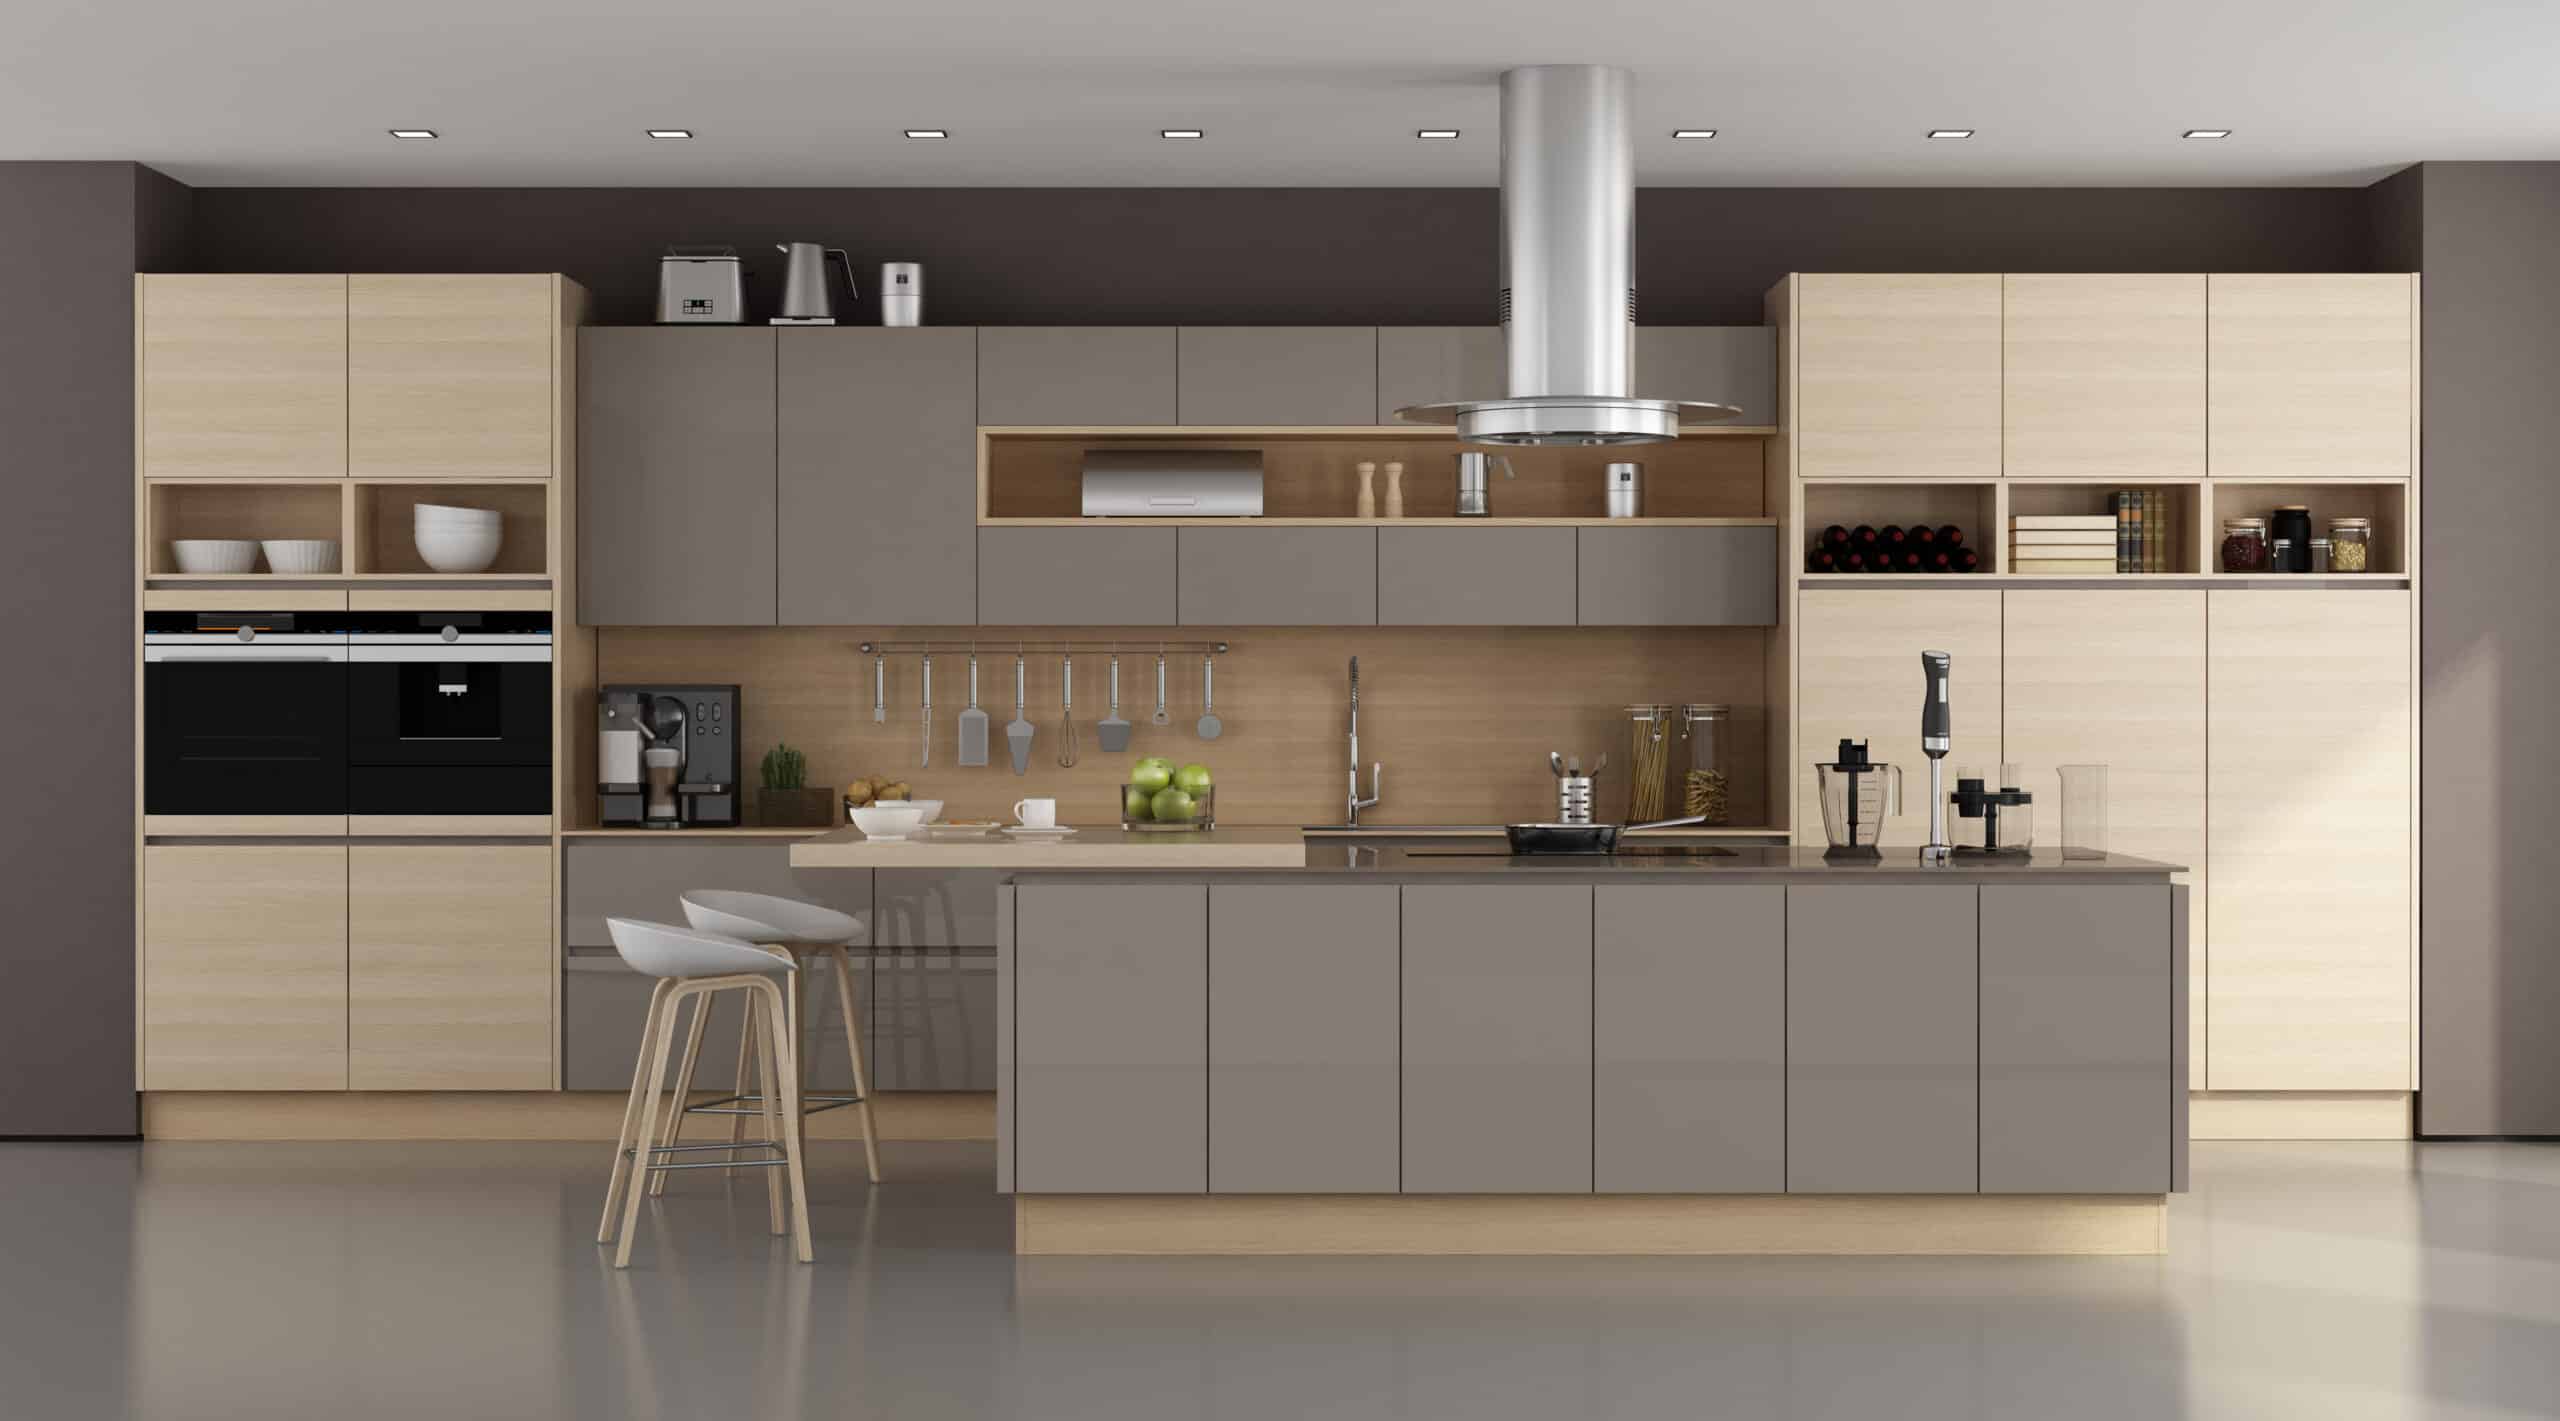 Spacious clean modern kitchen design with gray and cream kitchen cabinets